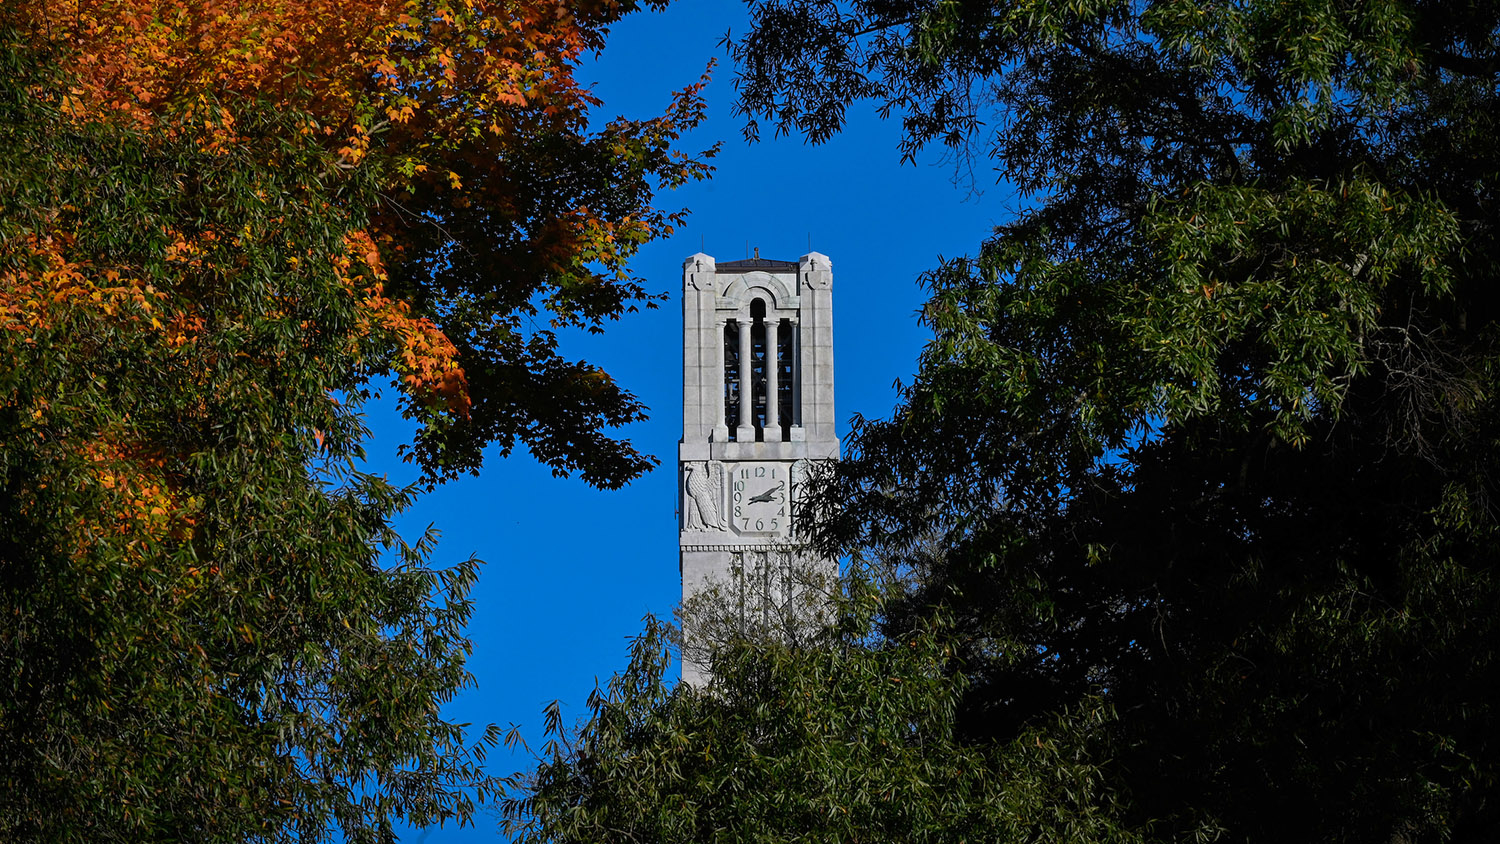 In this photo, the top of the Belltower is framed by fall foliage.